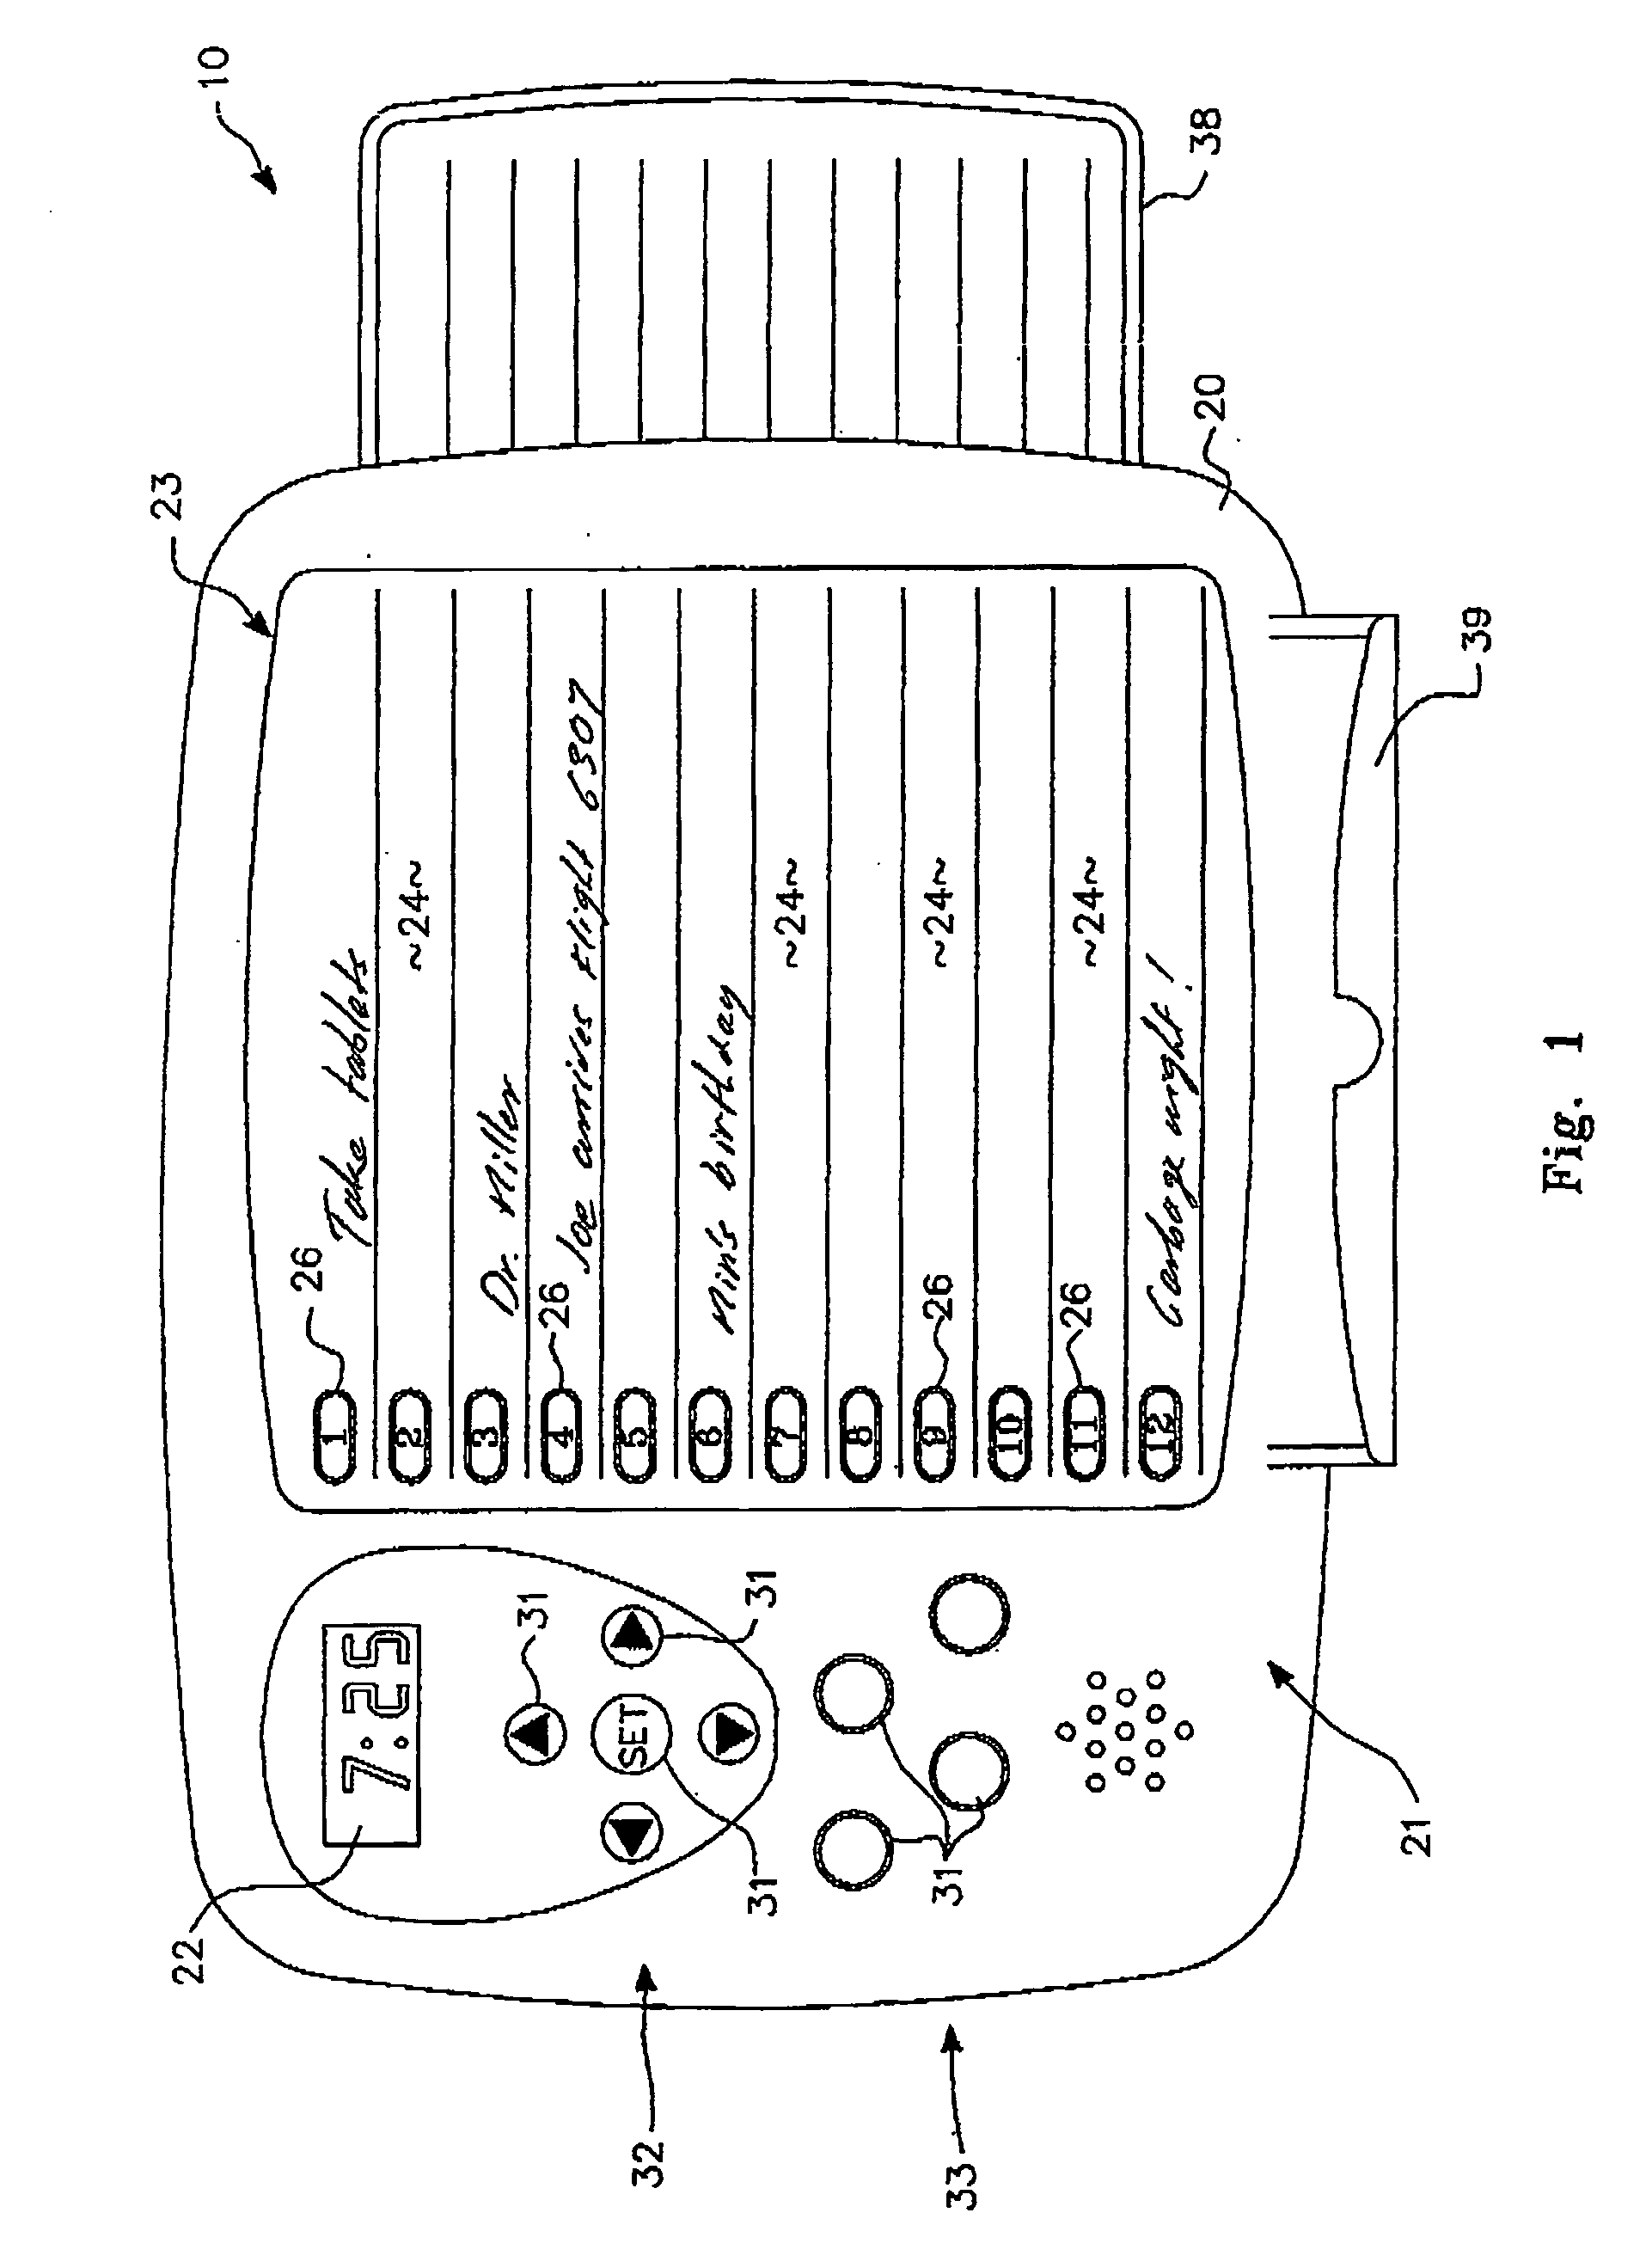 Electronically assisted memory aid